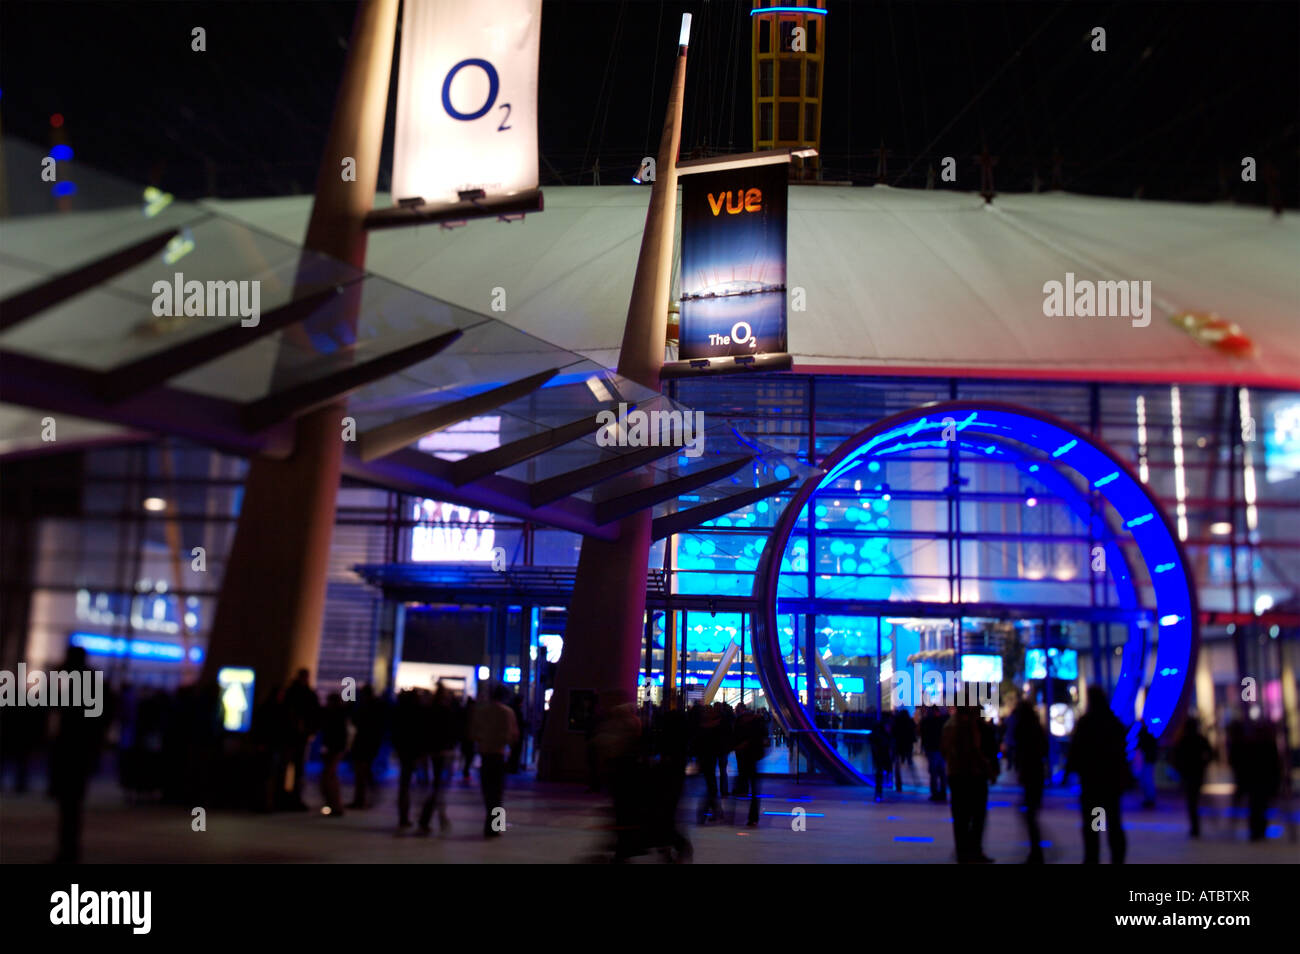 The O2 Arena is a popular venue in London Stock Photo